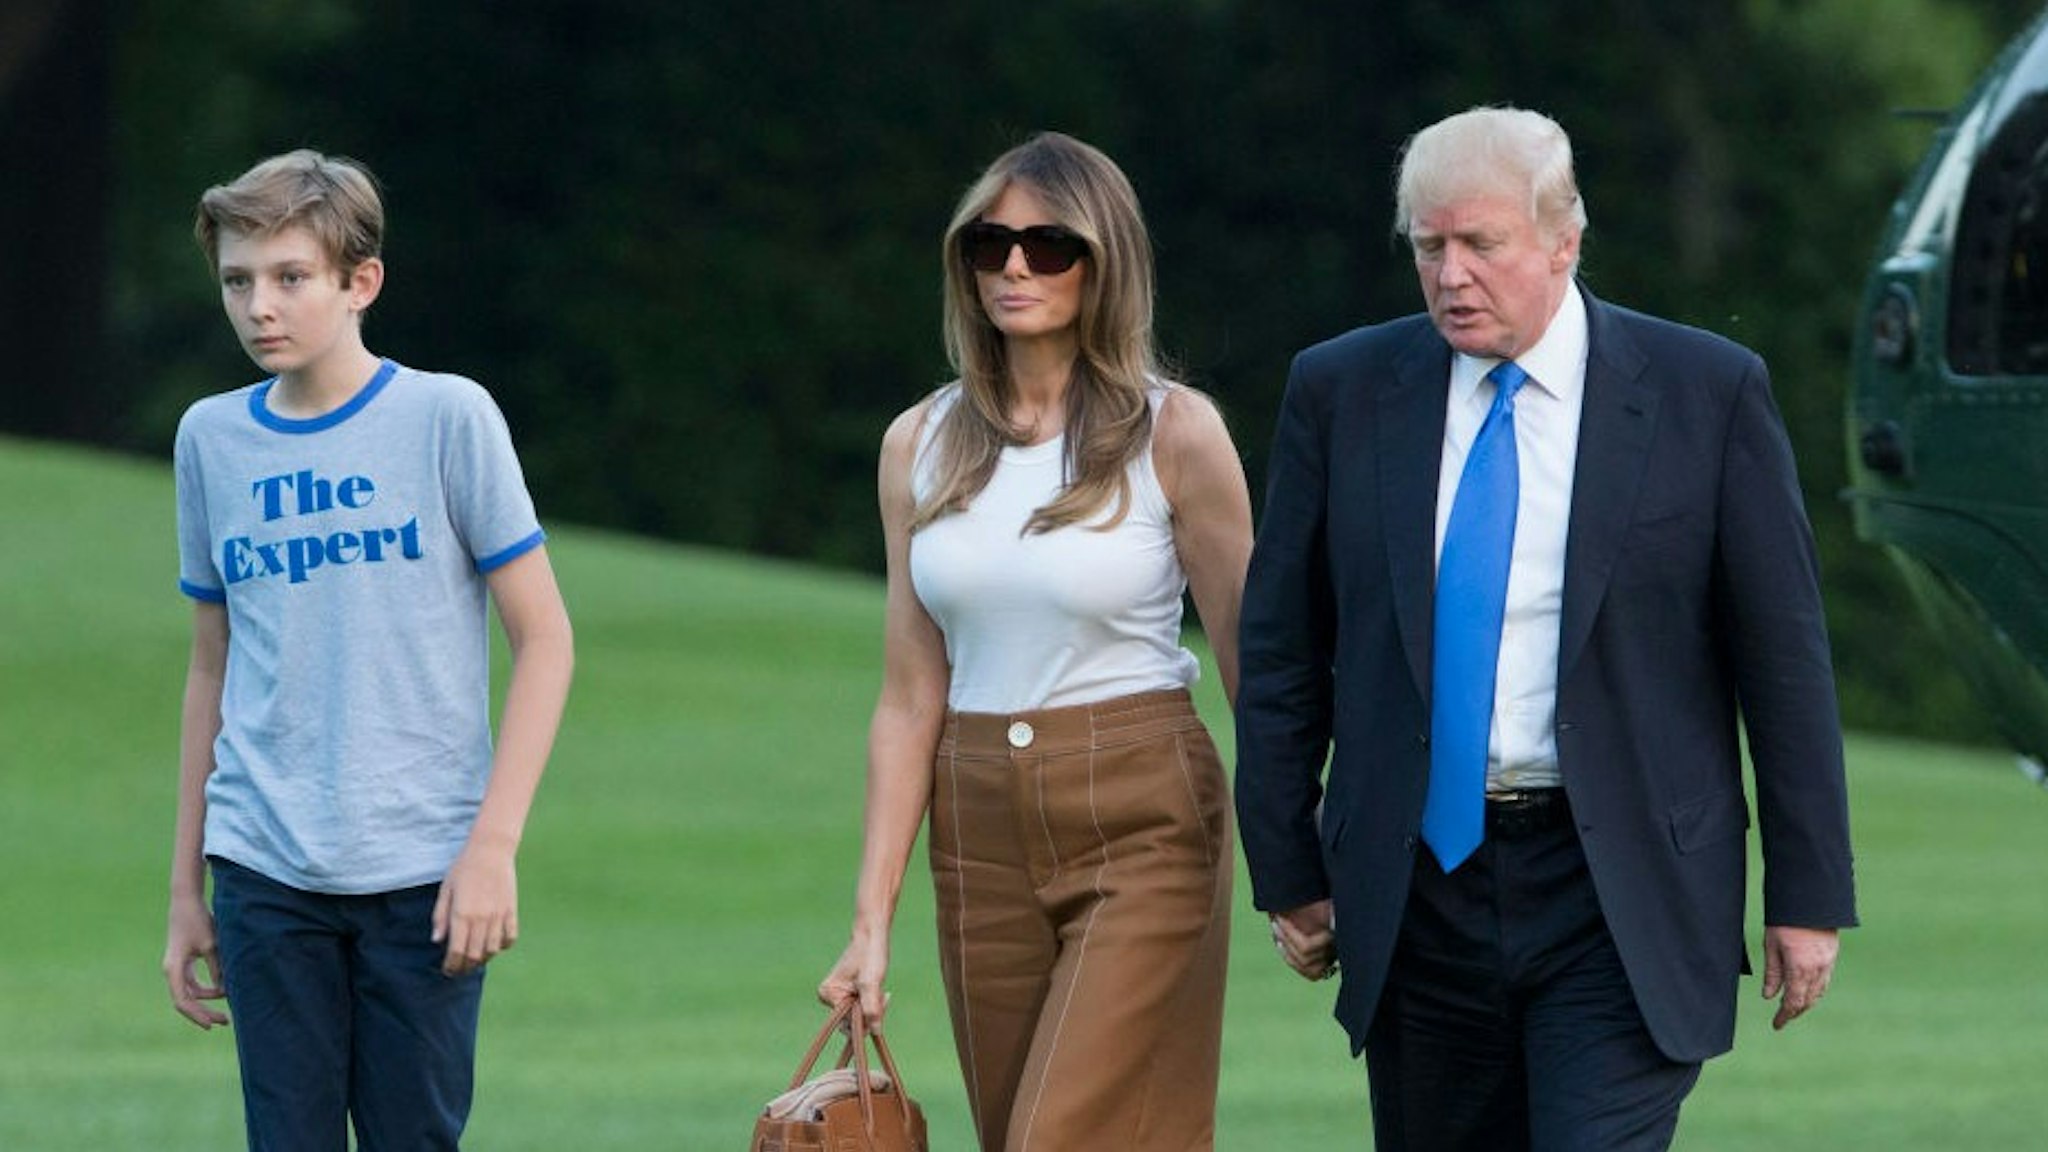 WASHINGTON, D.C. - JUNE 11: (AFP-OUT) U.S. President Donald Trump, first lady Melania Trump and their son Barron Trump arrive at the White House June 11, 2017 in Washington, DC. According to reports, Melania and Barron will soon be moving from Trump Tower in New York City to the White House. (Photo by